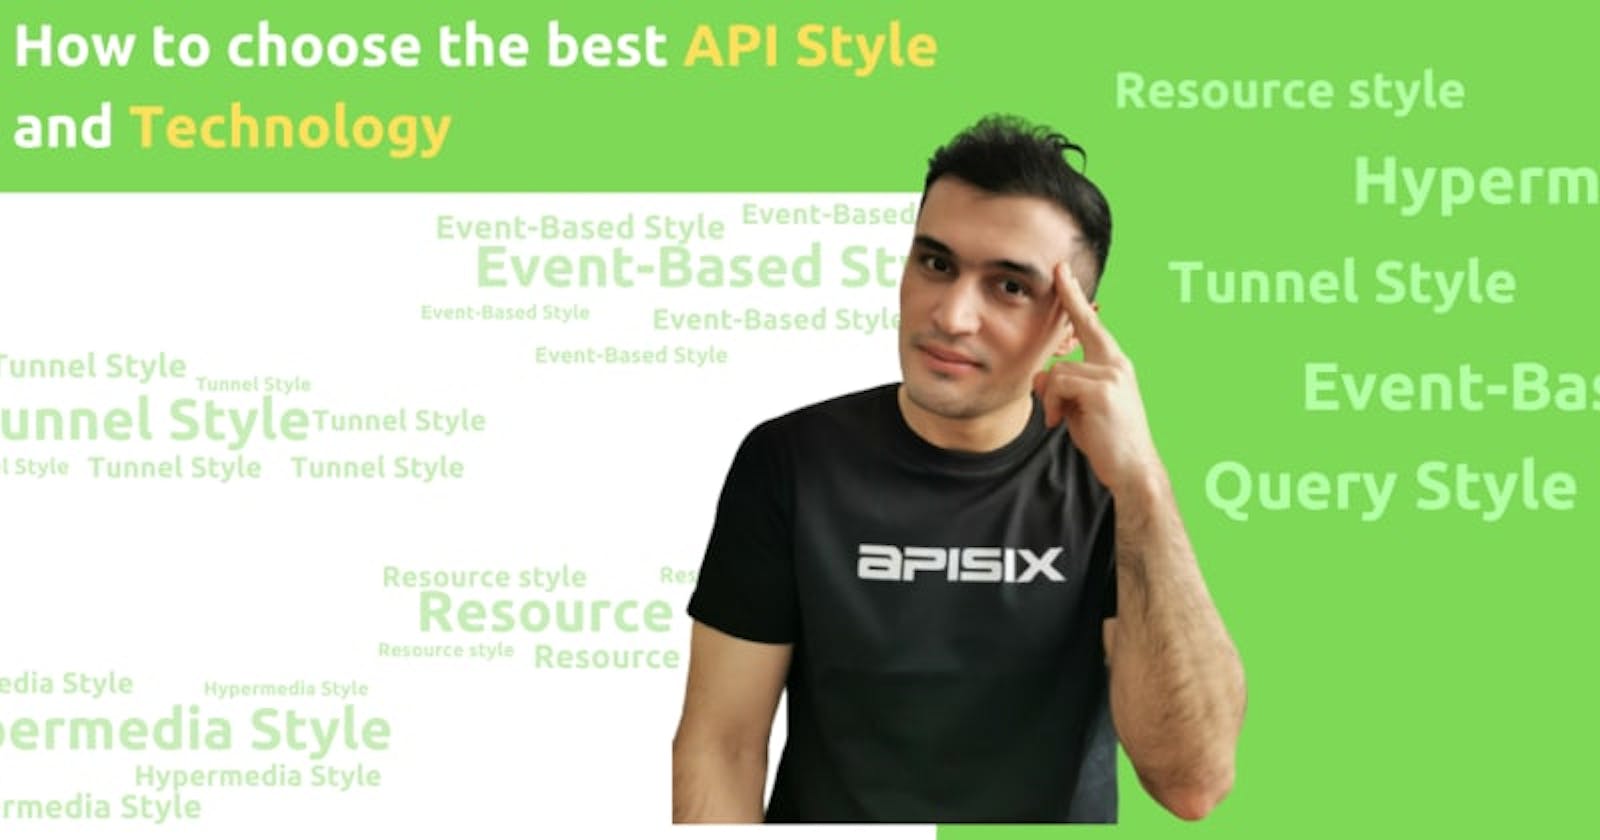 How to choose the right API Style and Technology